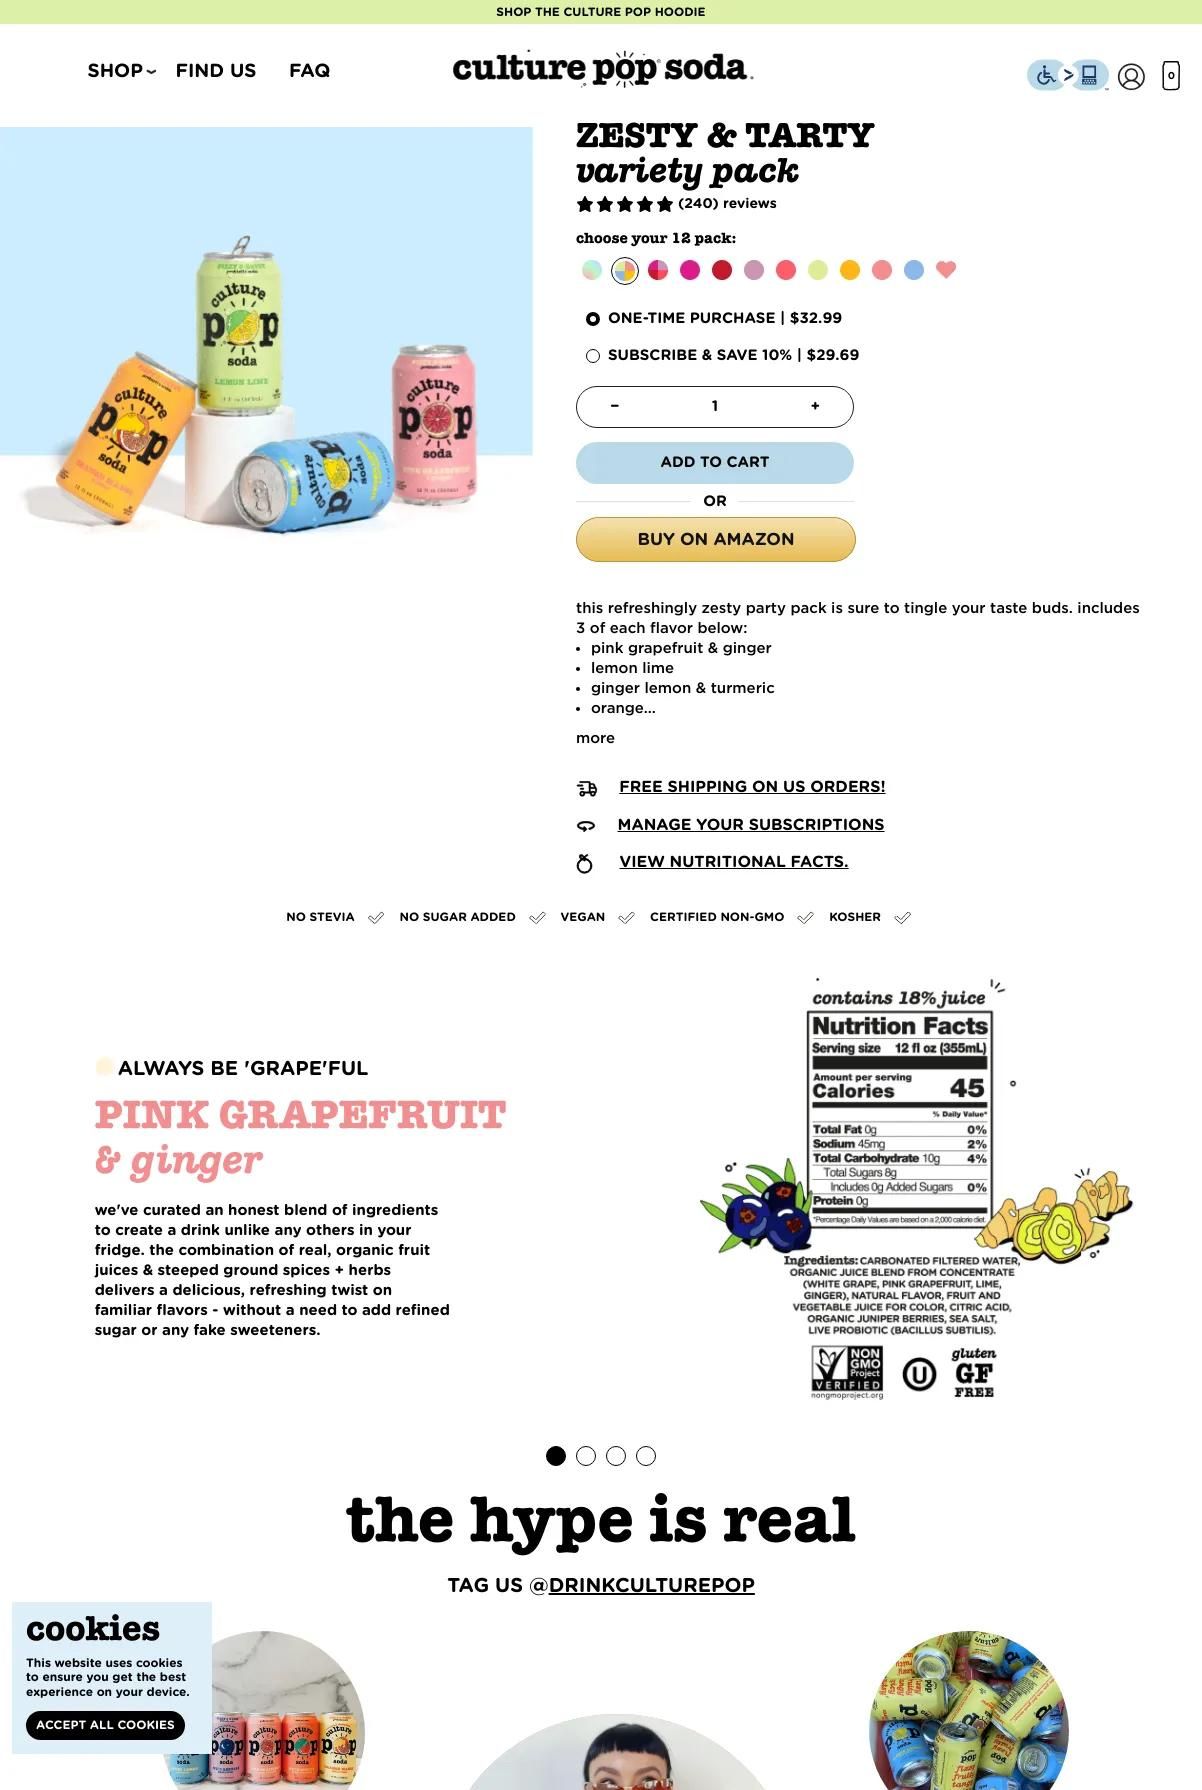 Screenshot 3 of Culture Pop (Example Shopify Food and Beverage Website)